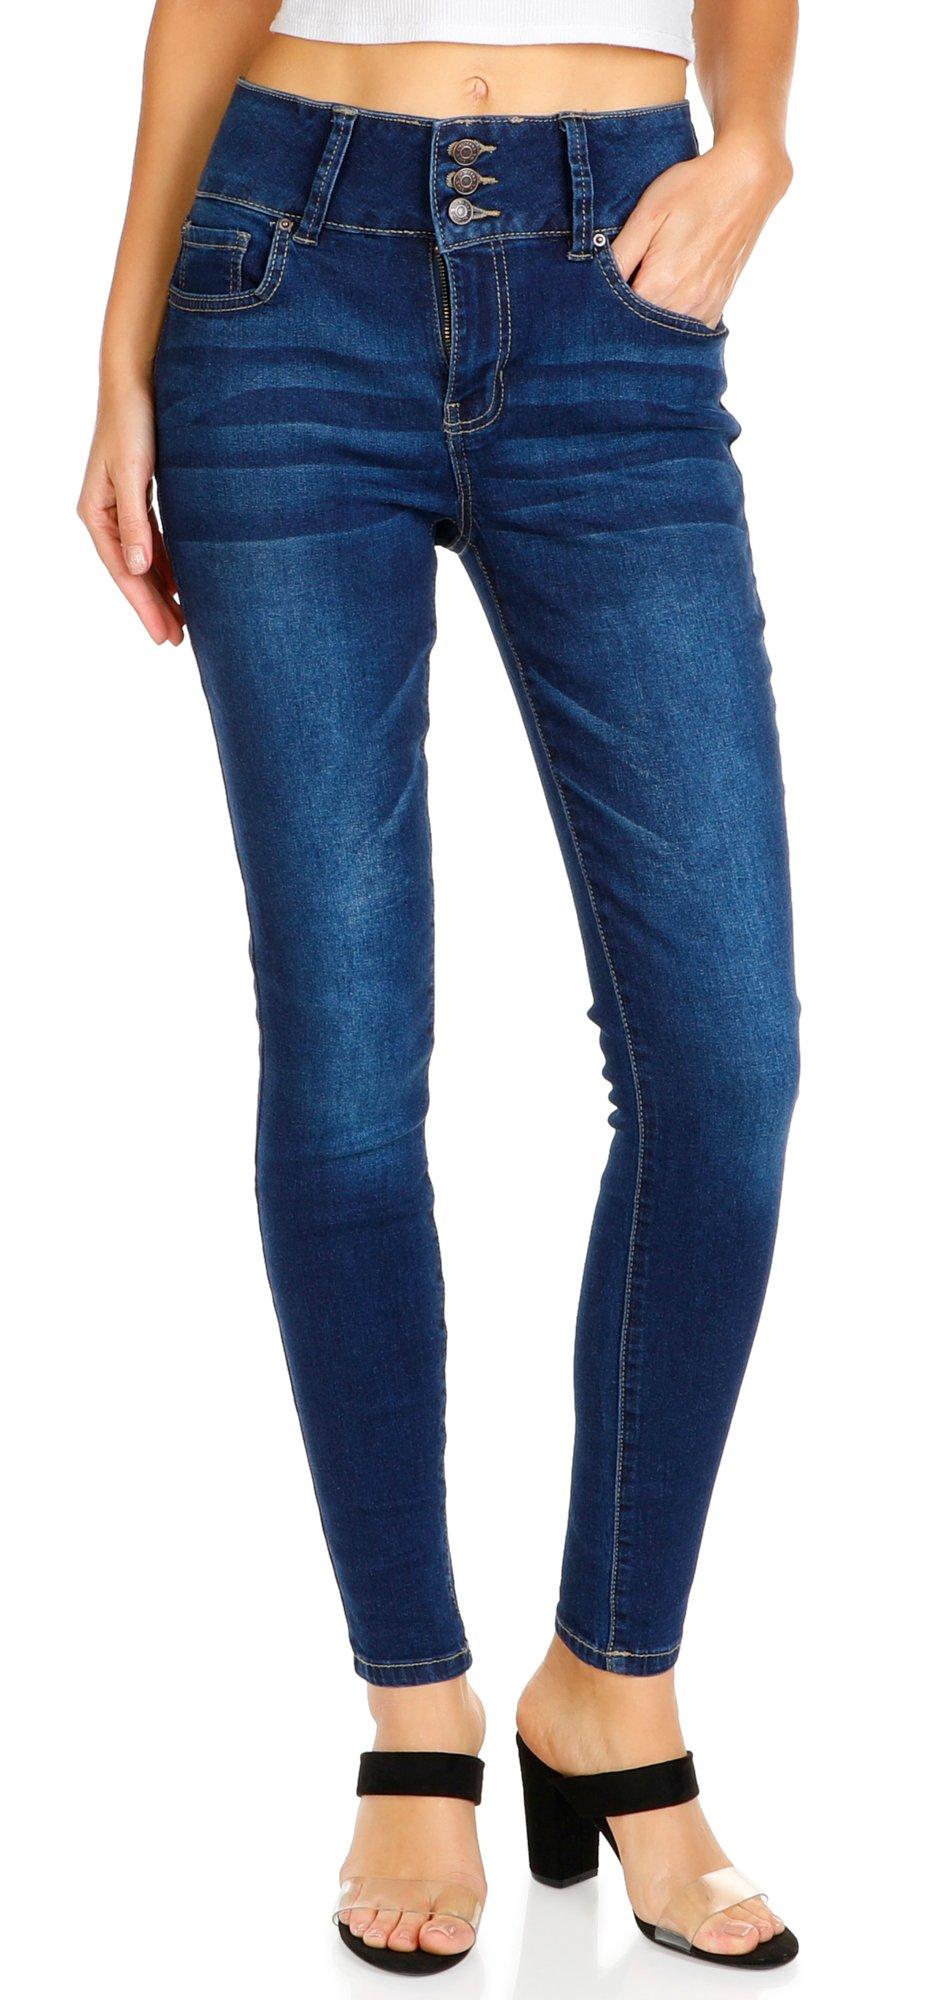 Juniors 3 Button Skinny Jeans